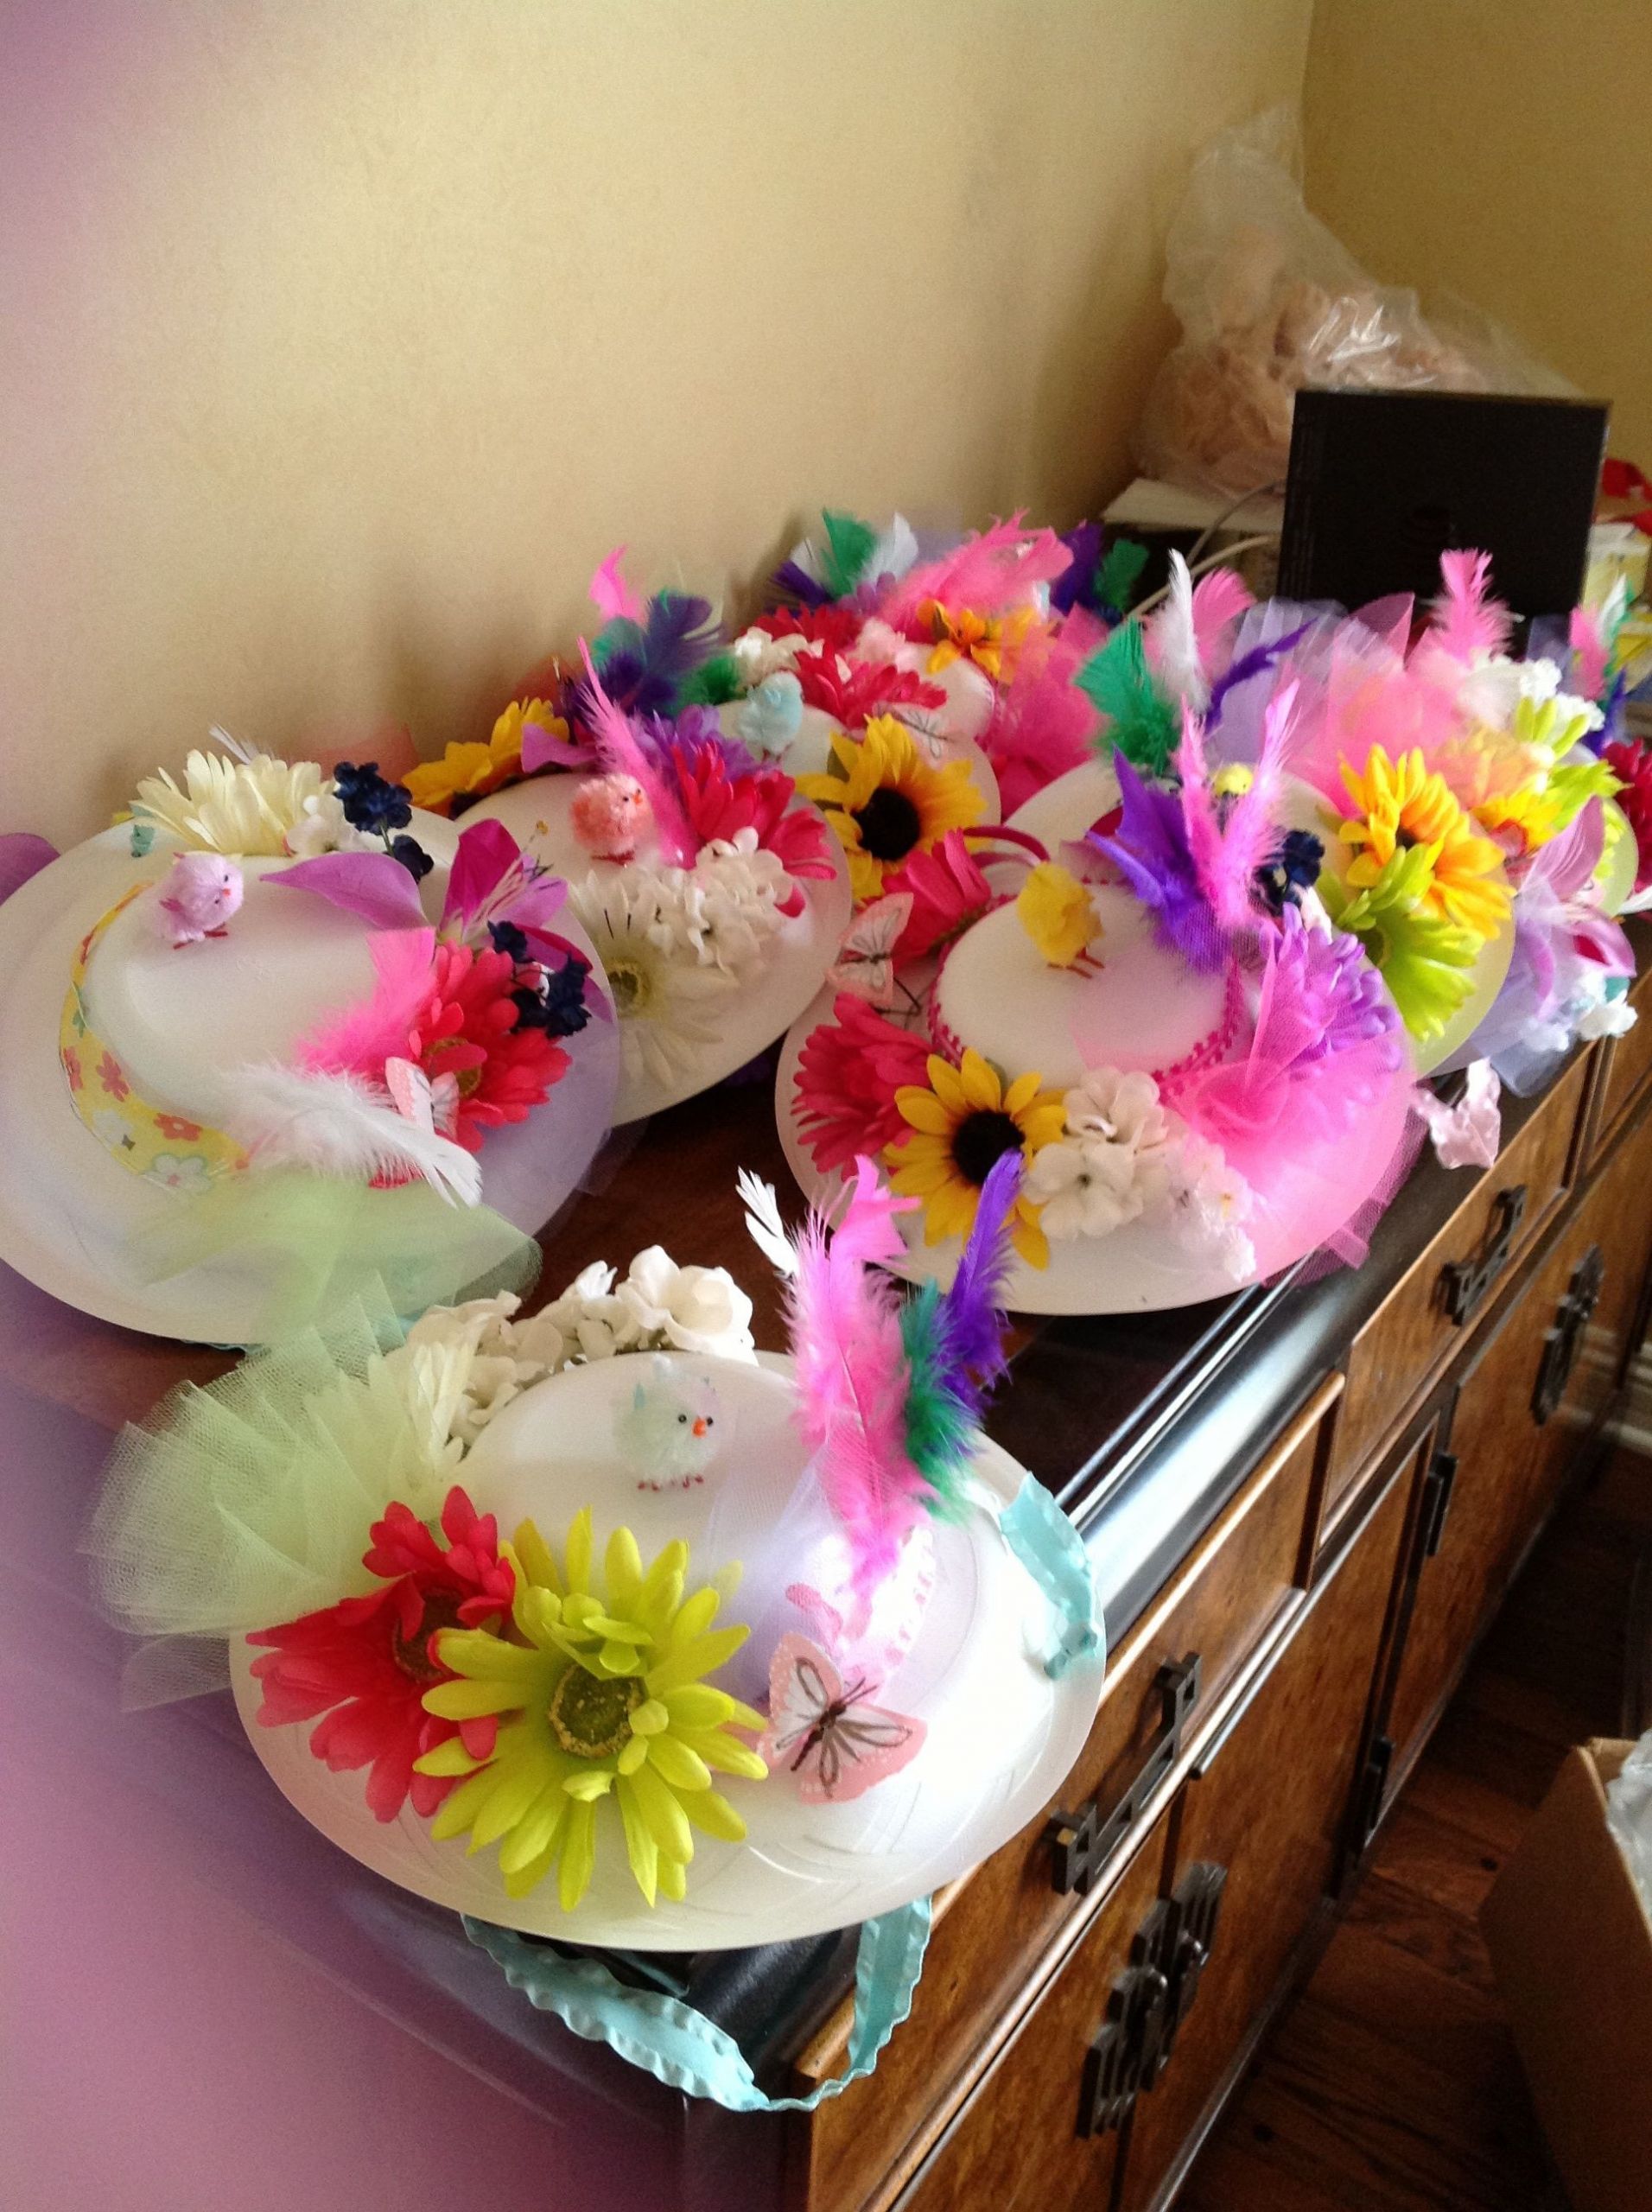 Tea Party Crafts Ideas
 I had my troop make tea party hats from Dixie plates for a